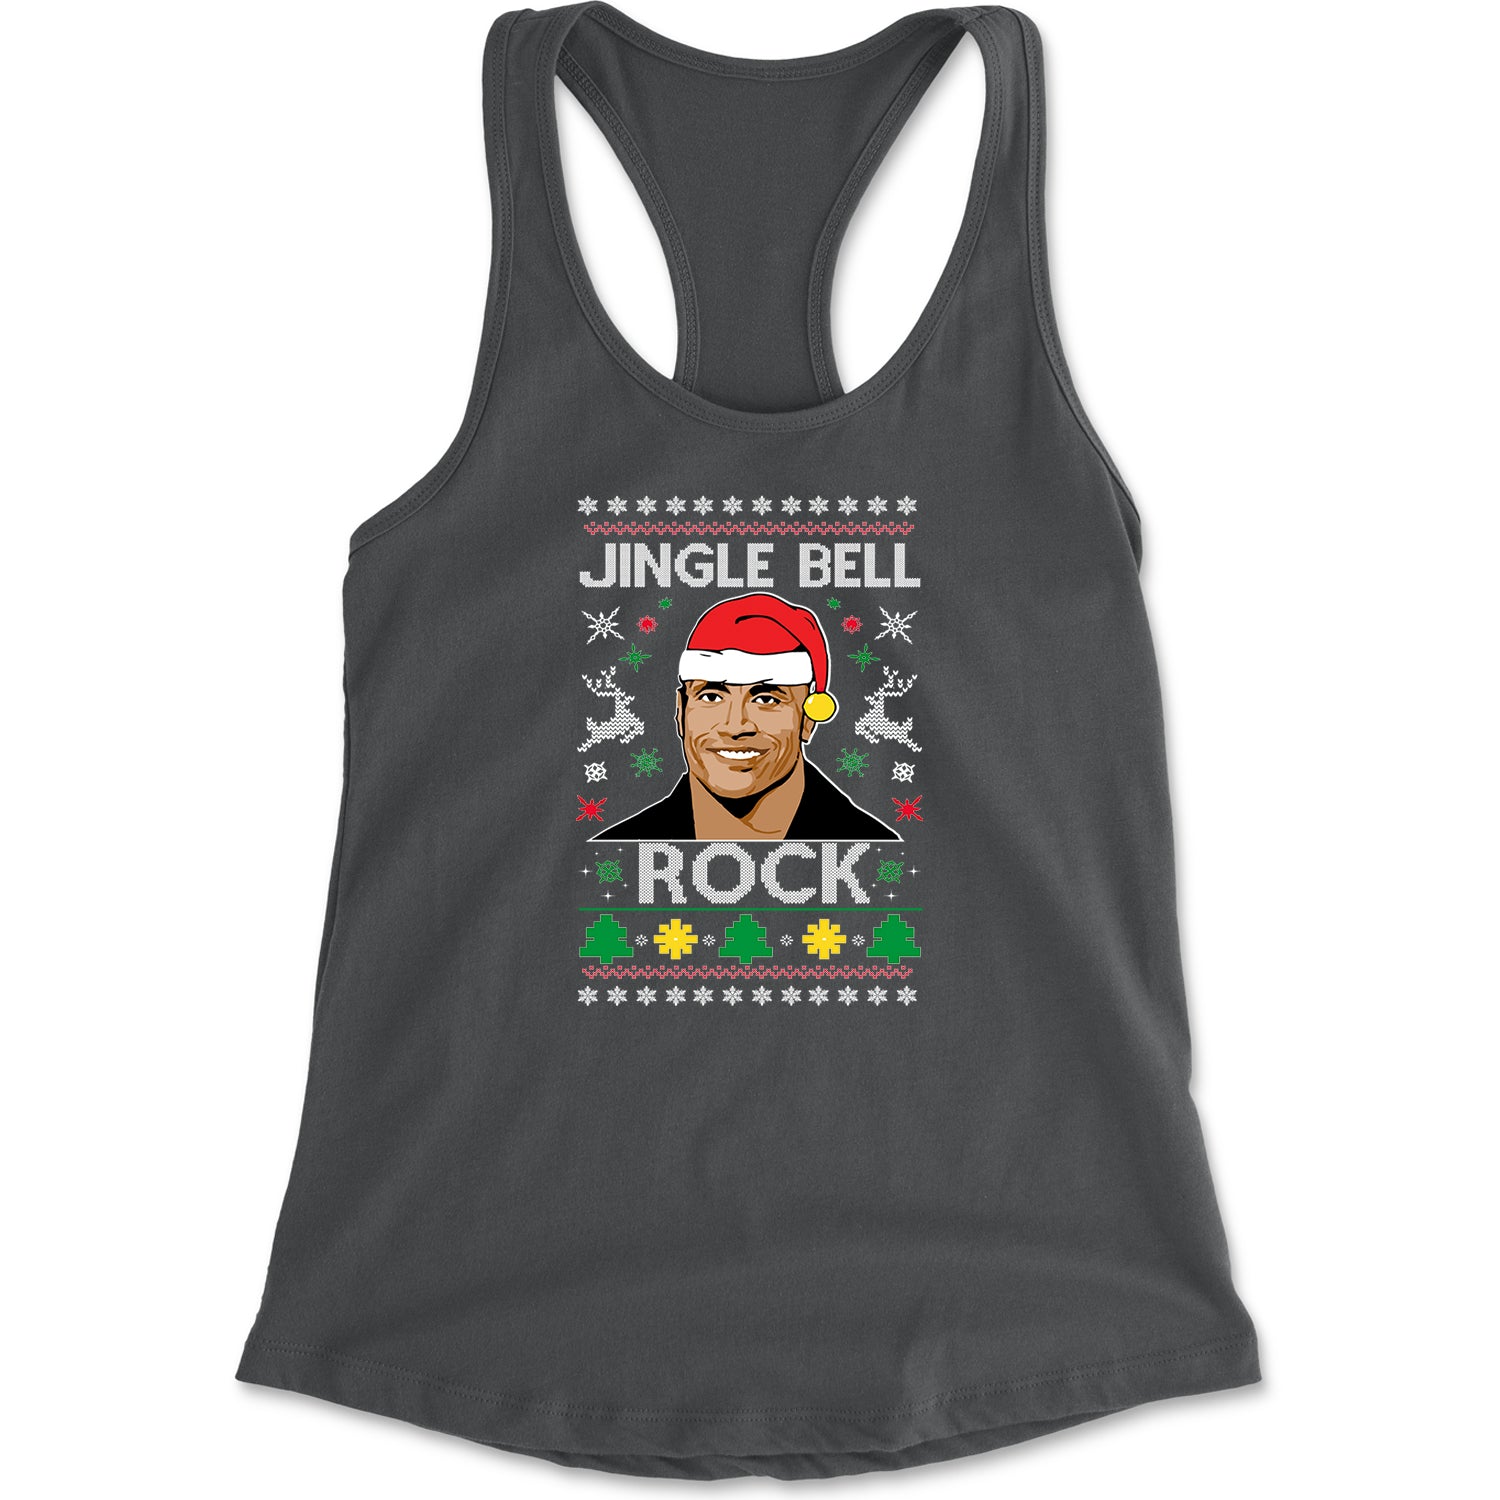 Jingle Bell Rock Ugly Christmas Racerback Tank Top for Women 2018, champ, Christmas, dwayne, johnson, peoples, rock, Sweatshirts, the, Ugly by Expression Tees